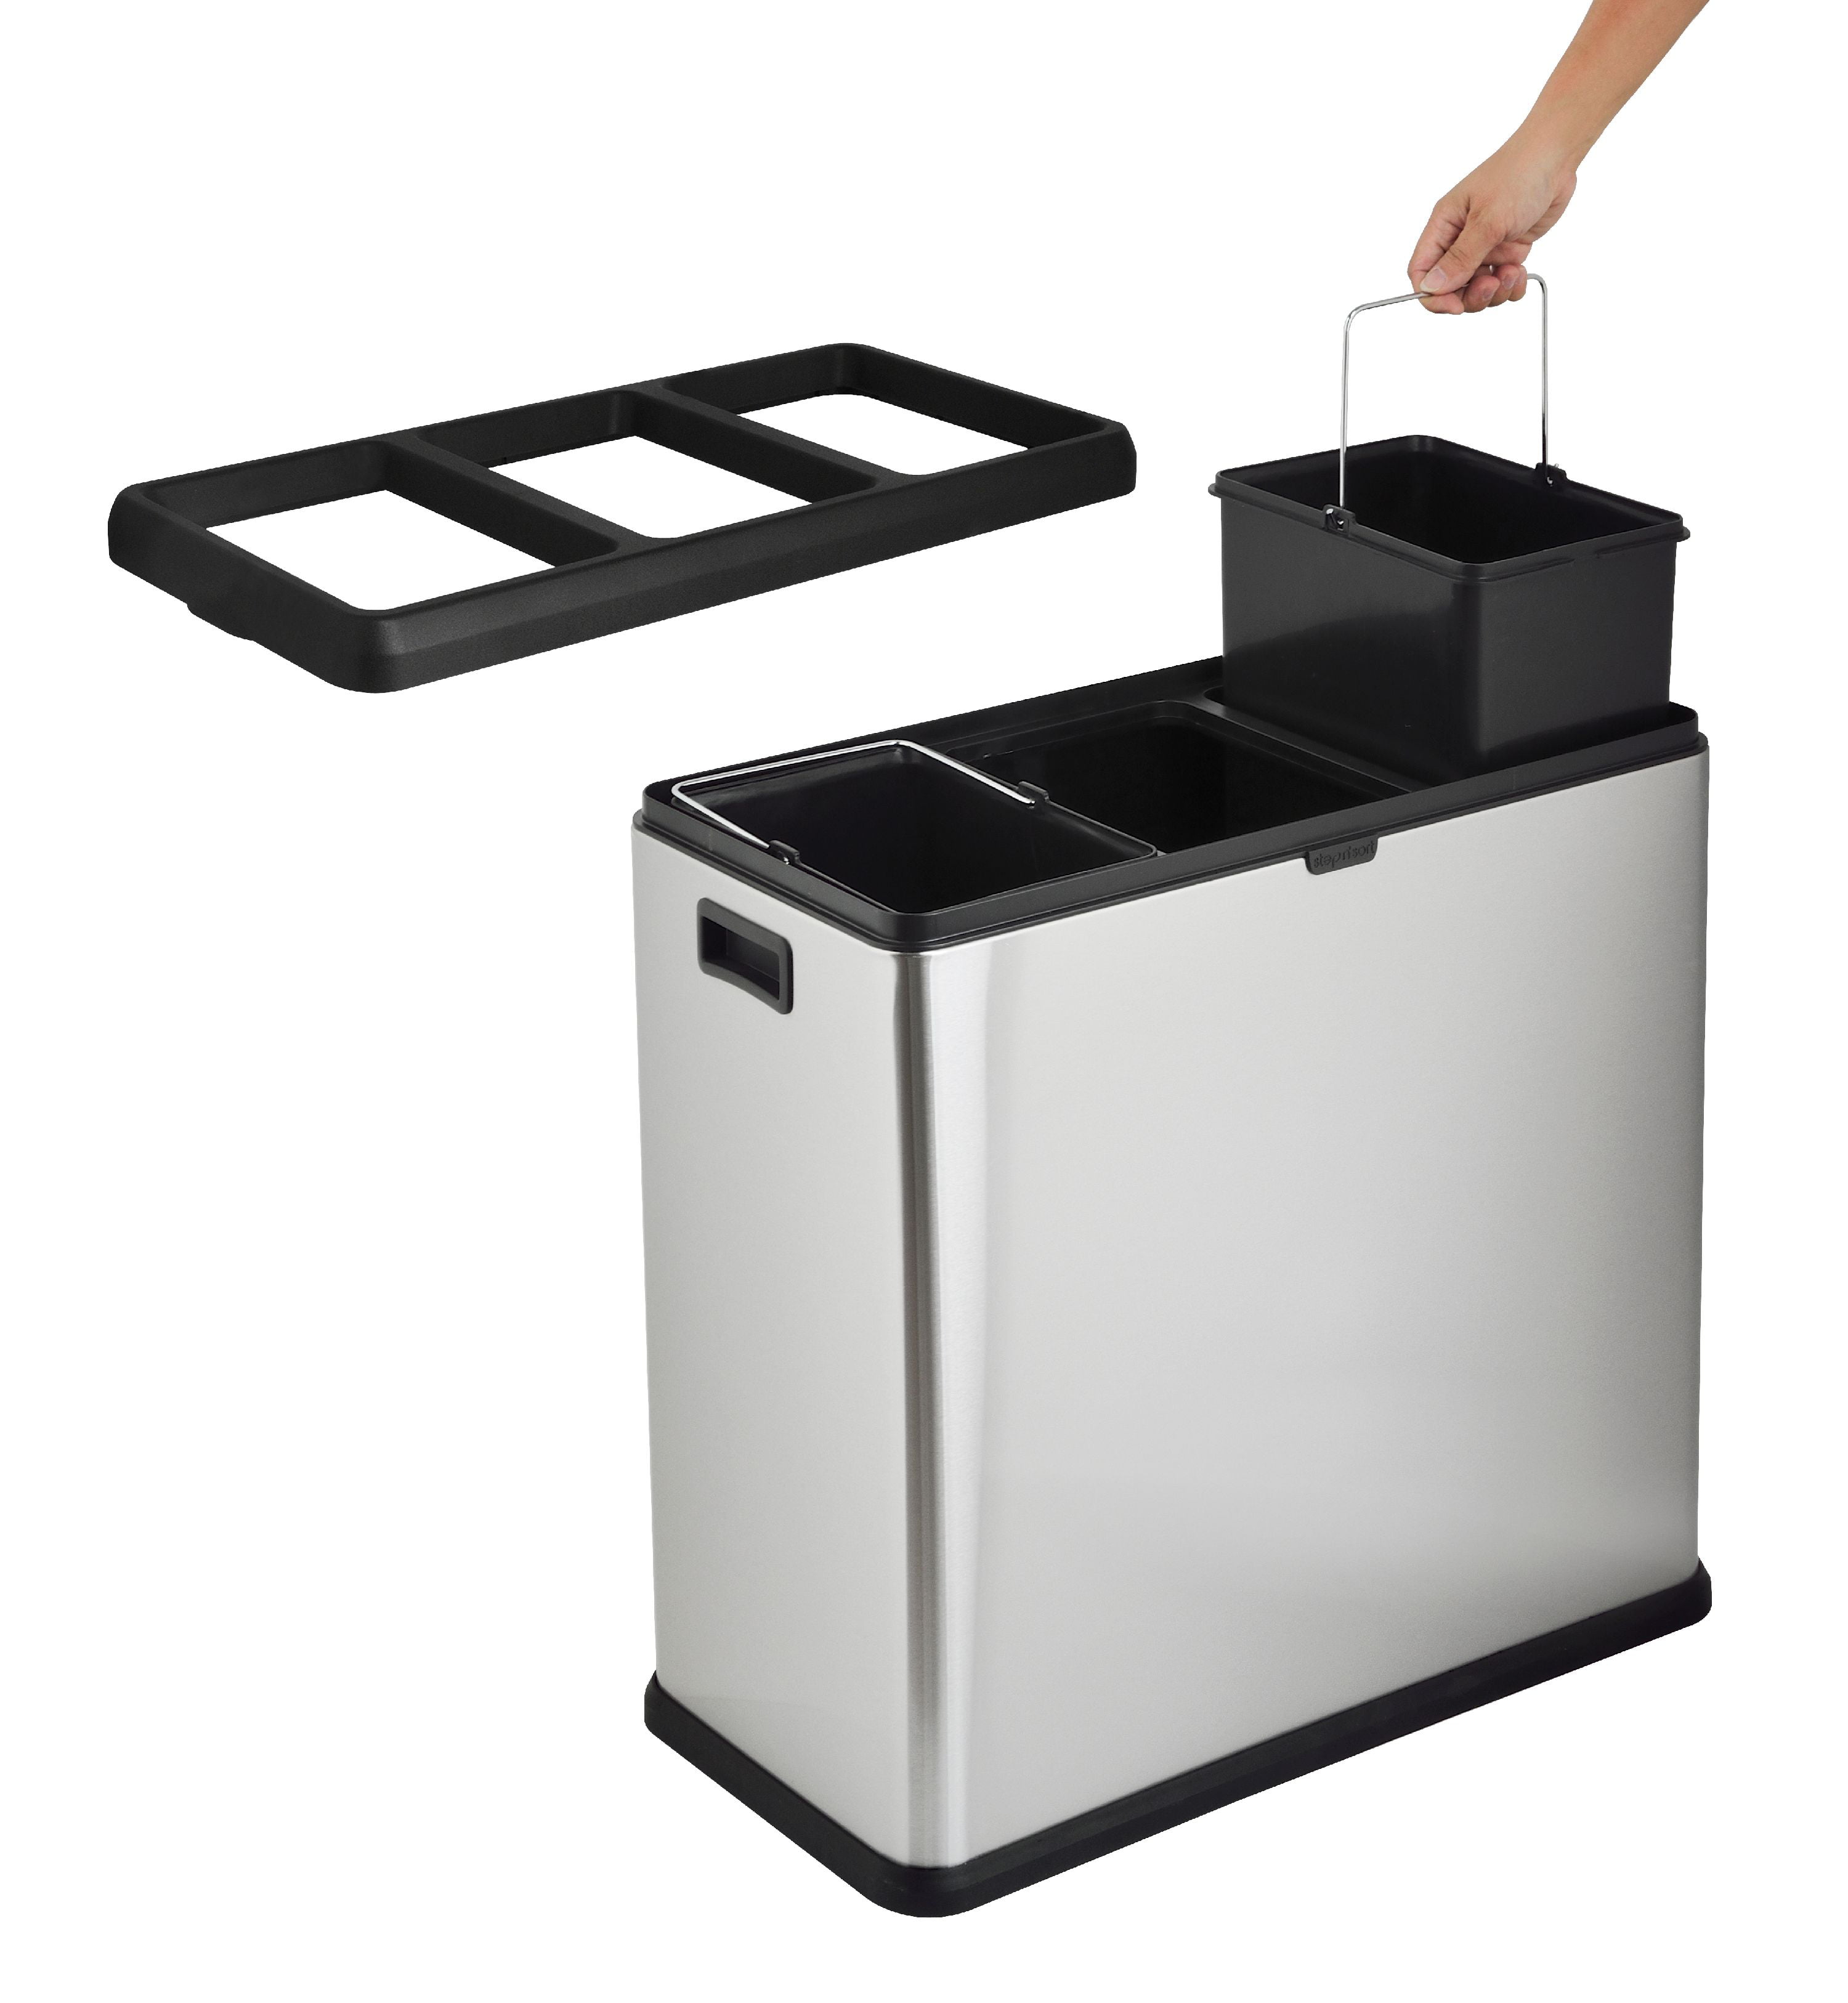 Step N Sort 16 Gallon 3-Compartment Stainless Steel Trash and Recycling Bin